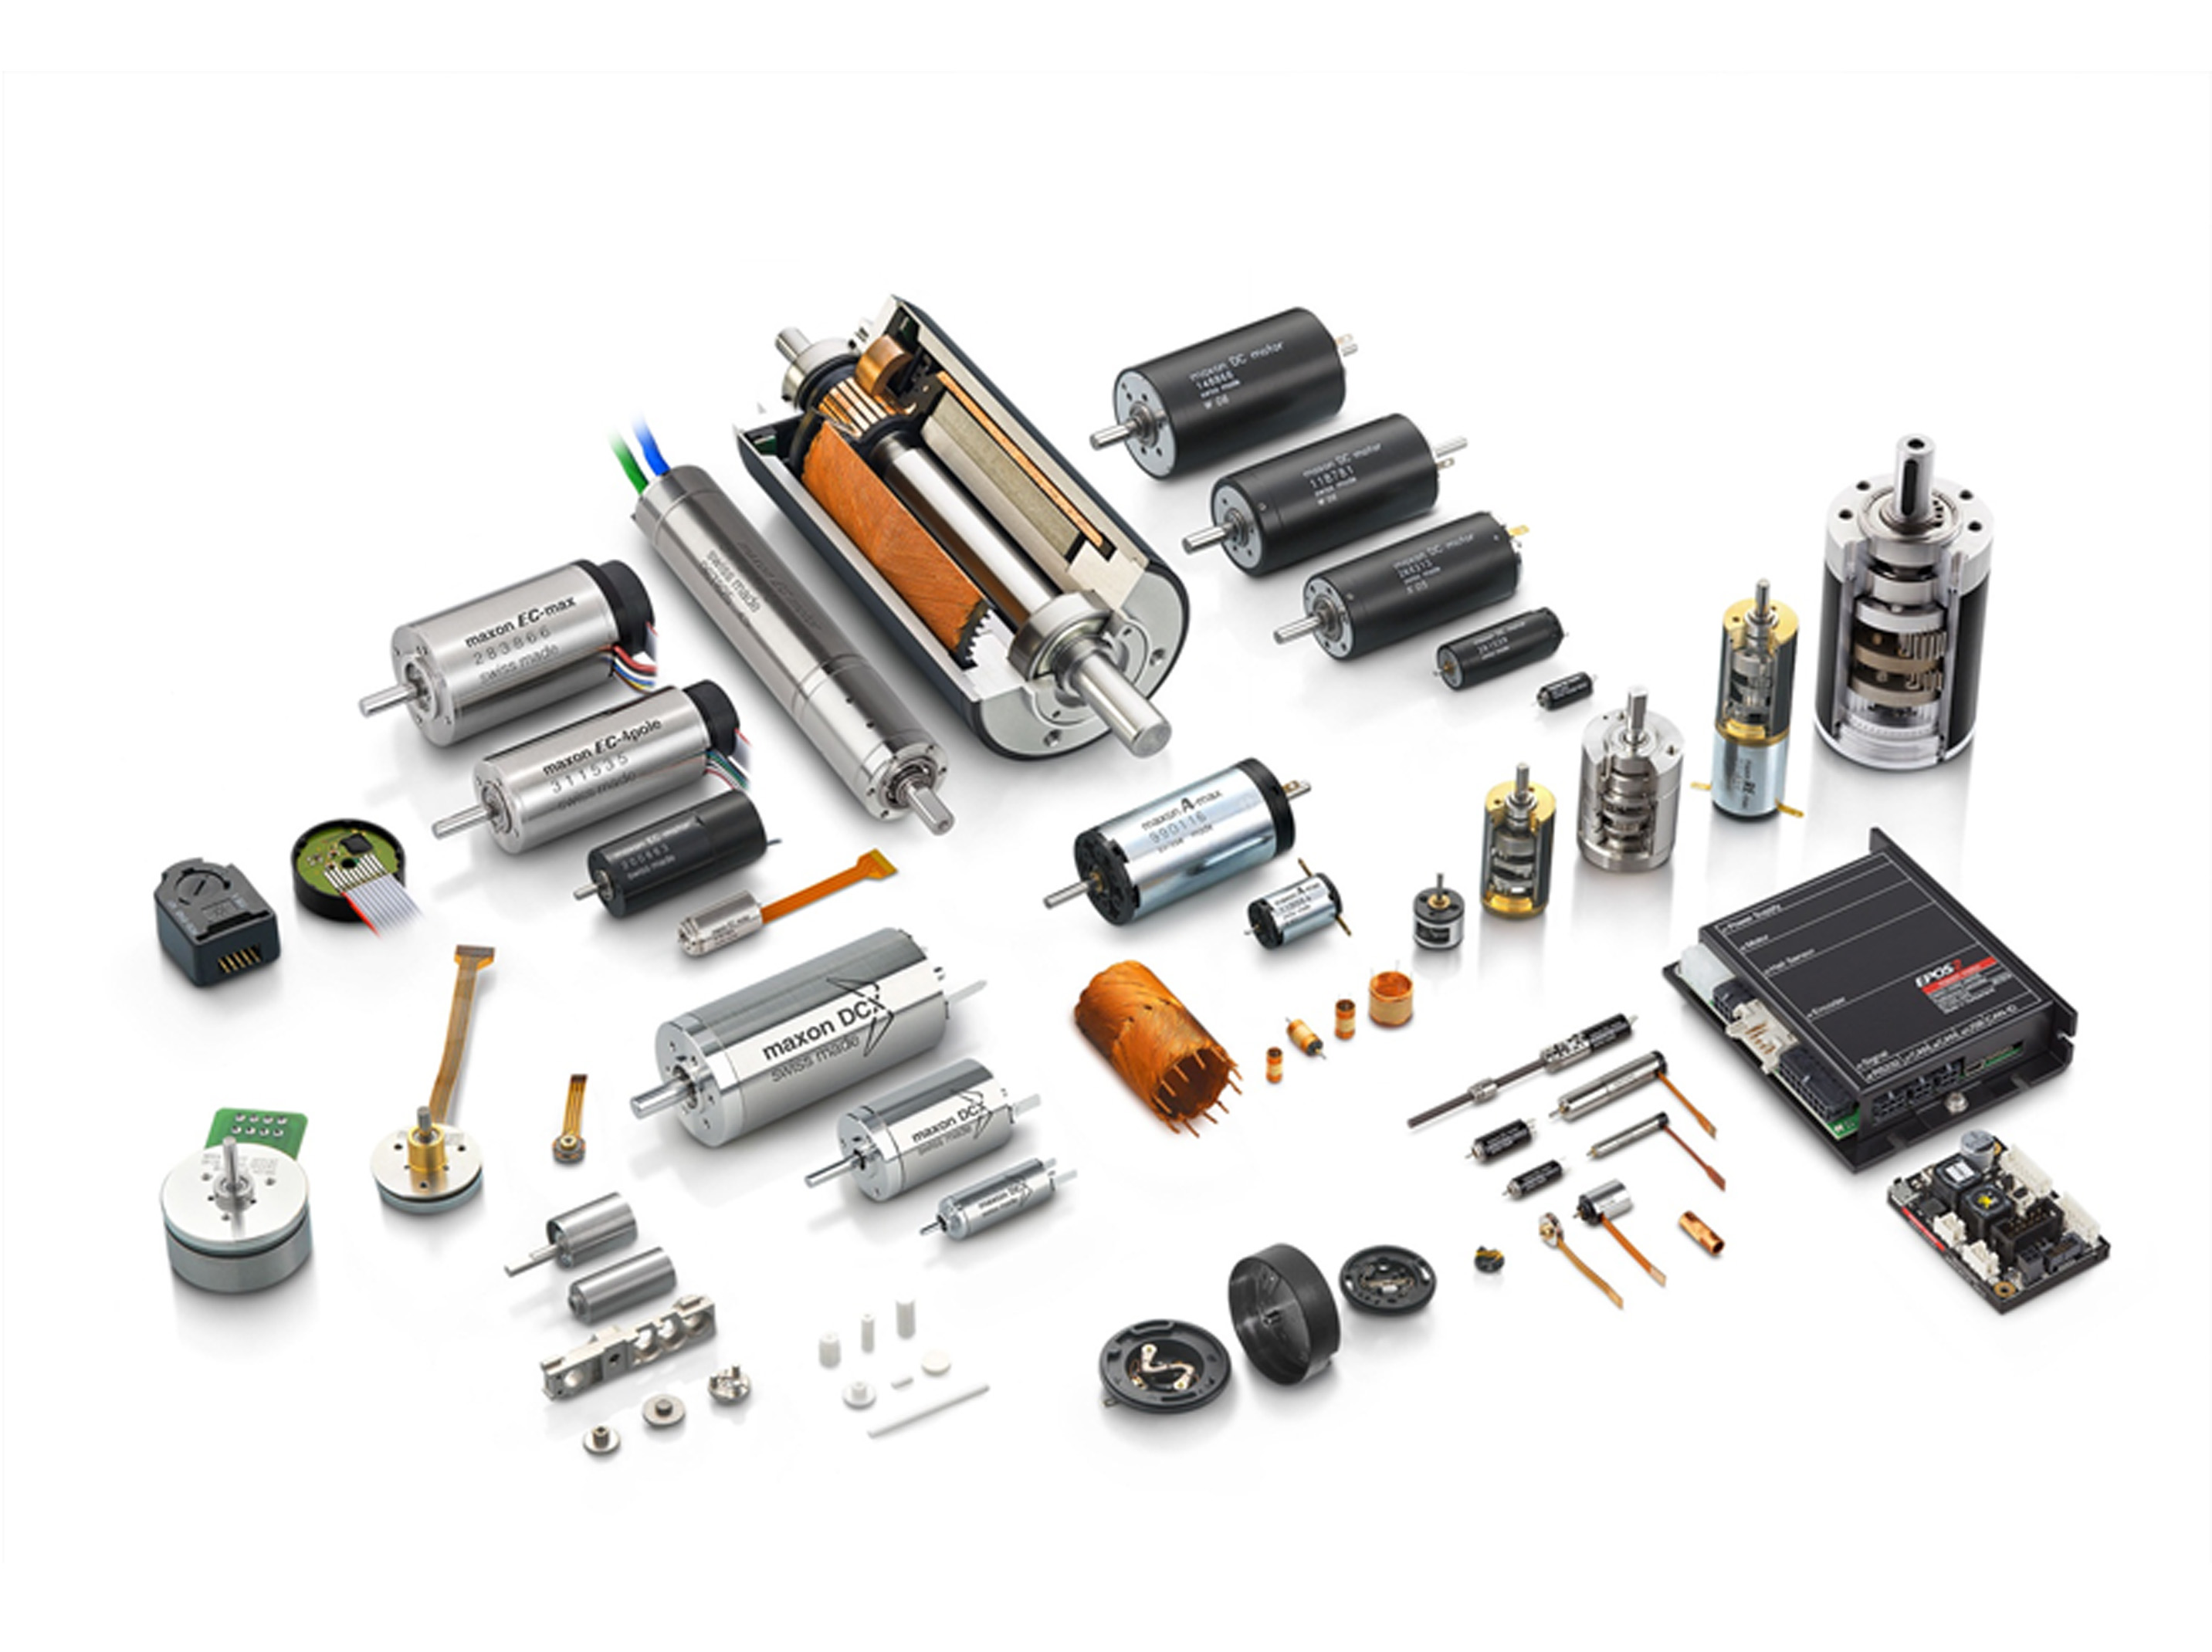 If you have any questions on maxon&rsquo;s products, combinations of products or producing complete systems, please contact the specialised Sales Engineer or, if you are not sure which one would be best, please contact the maxon office on +44 (0) 1189 733337 or sales